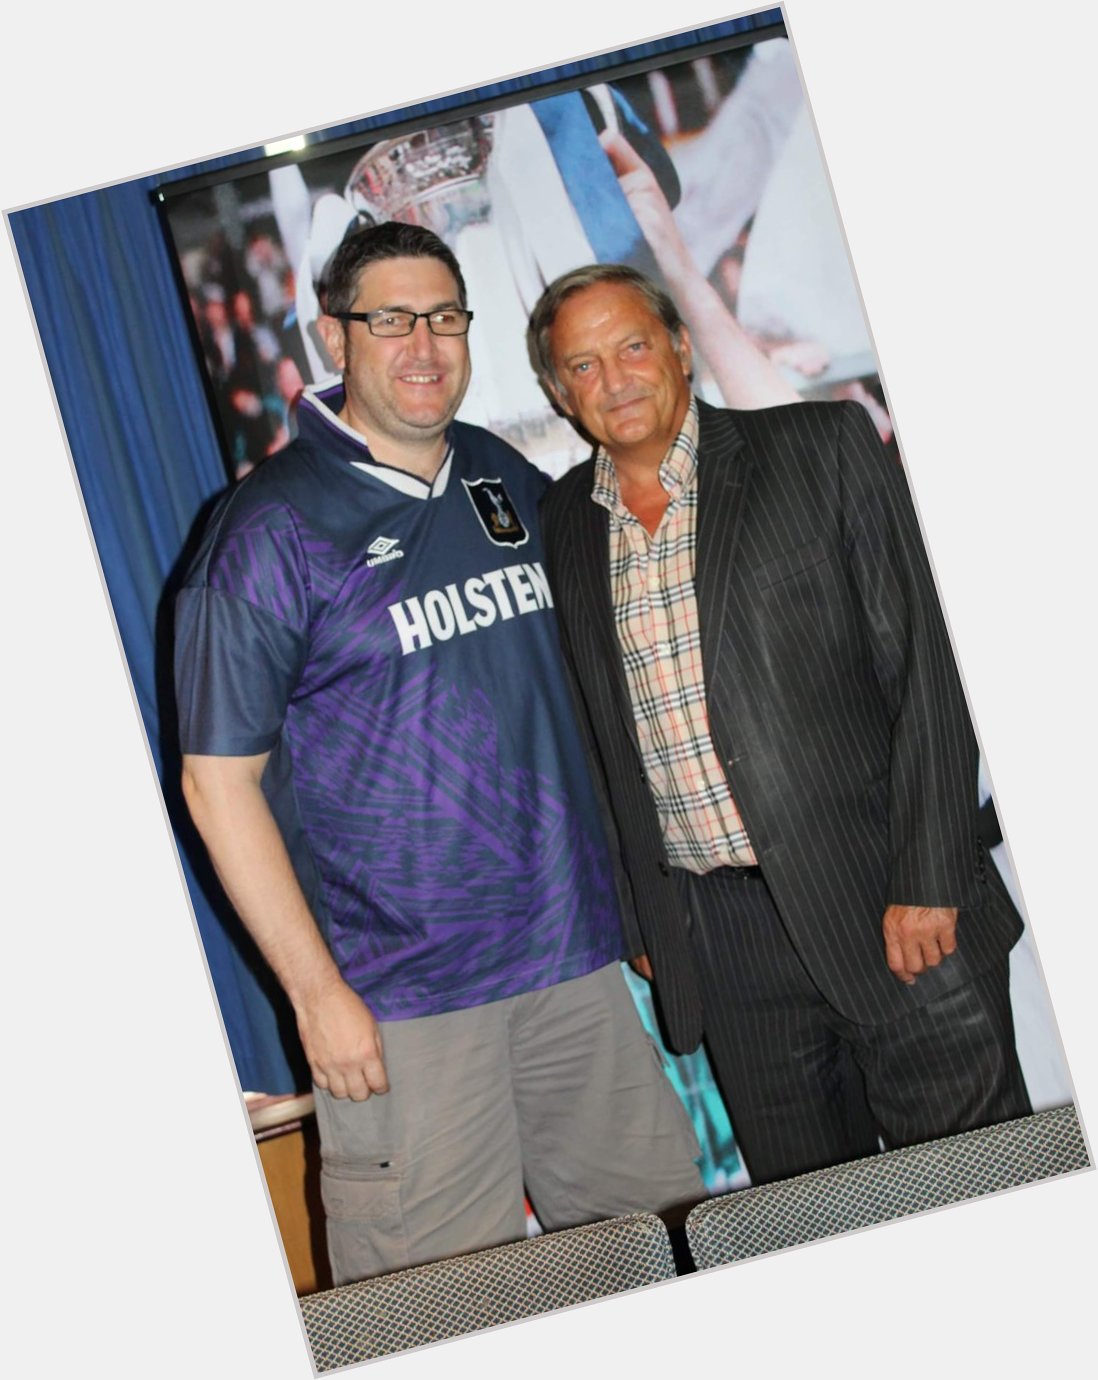 Morning guys happy birthday to our Captain Gary Mabbutt  